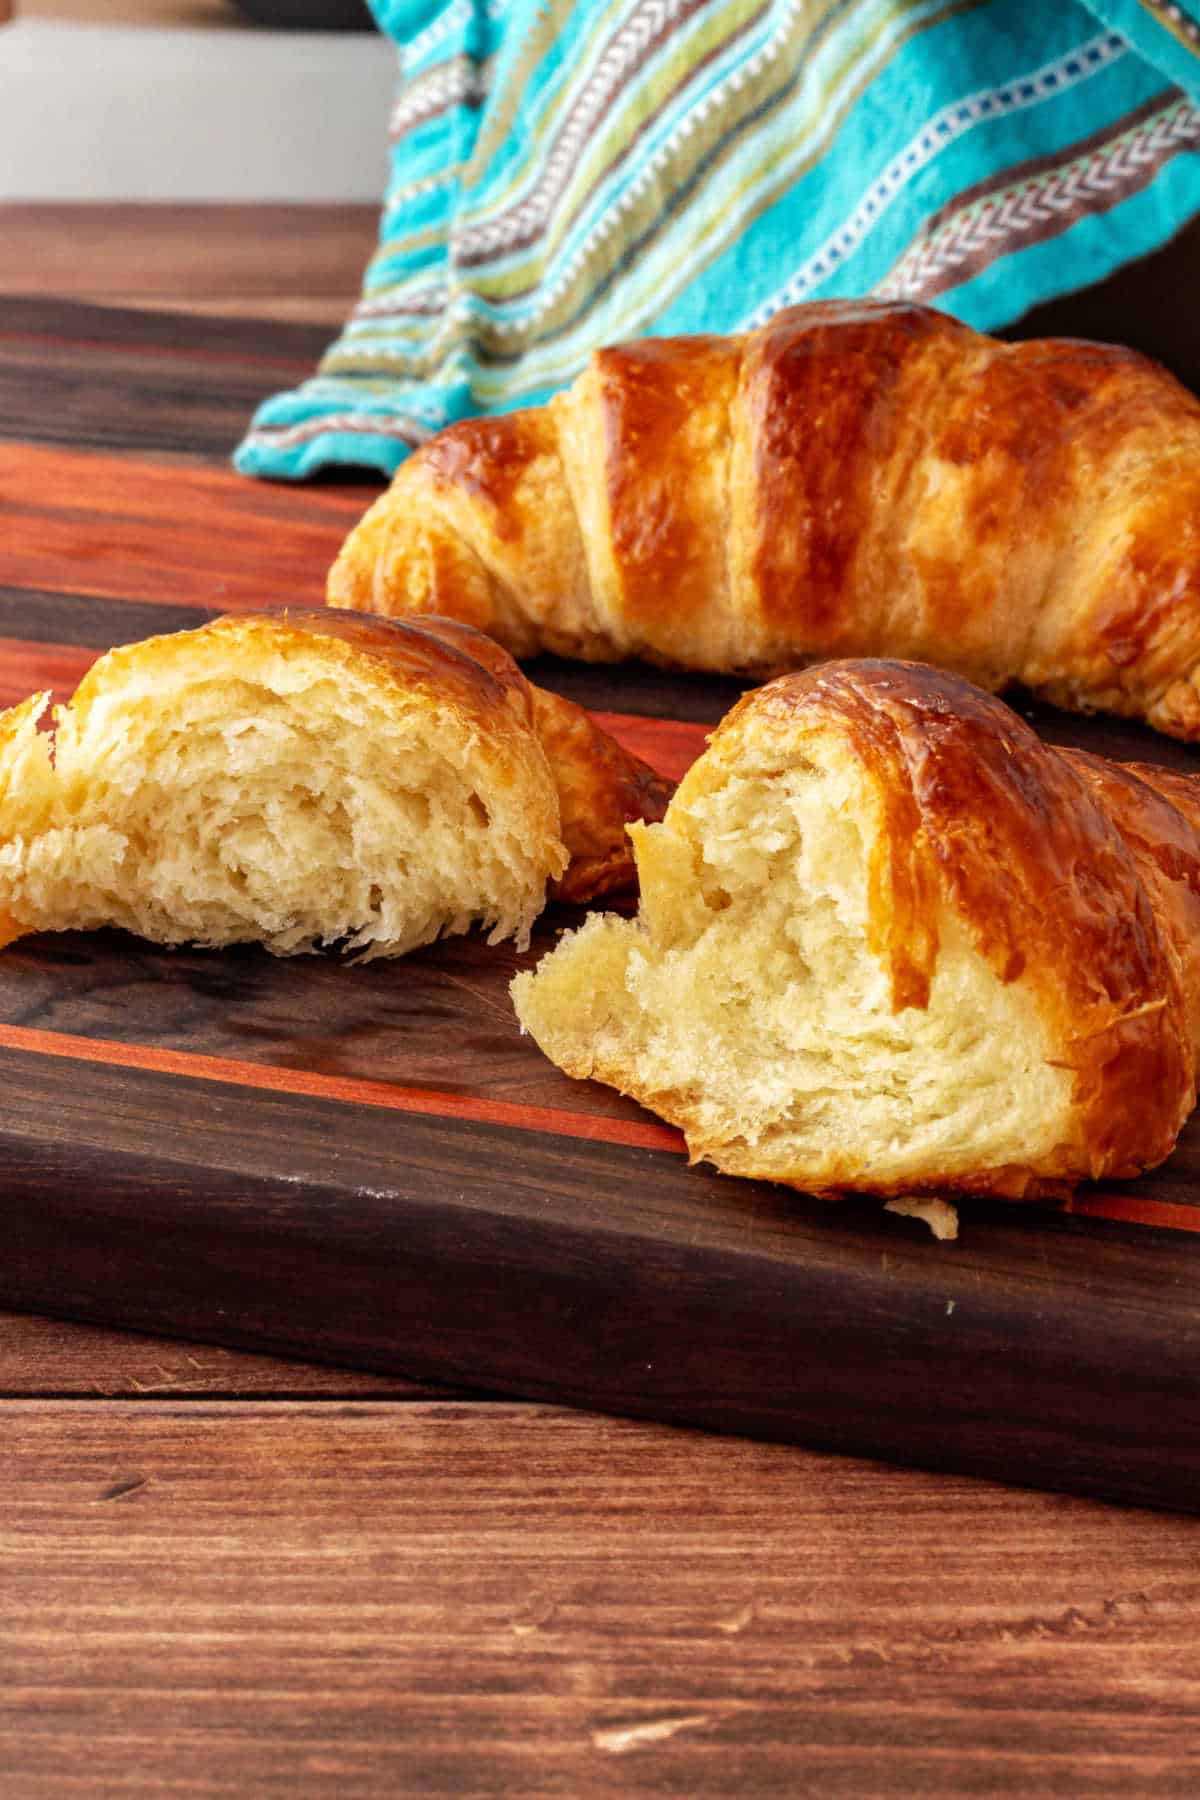 A croissant that has been pulled in half on a cutting board with a full croissant behind it.